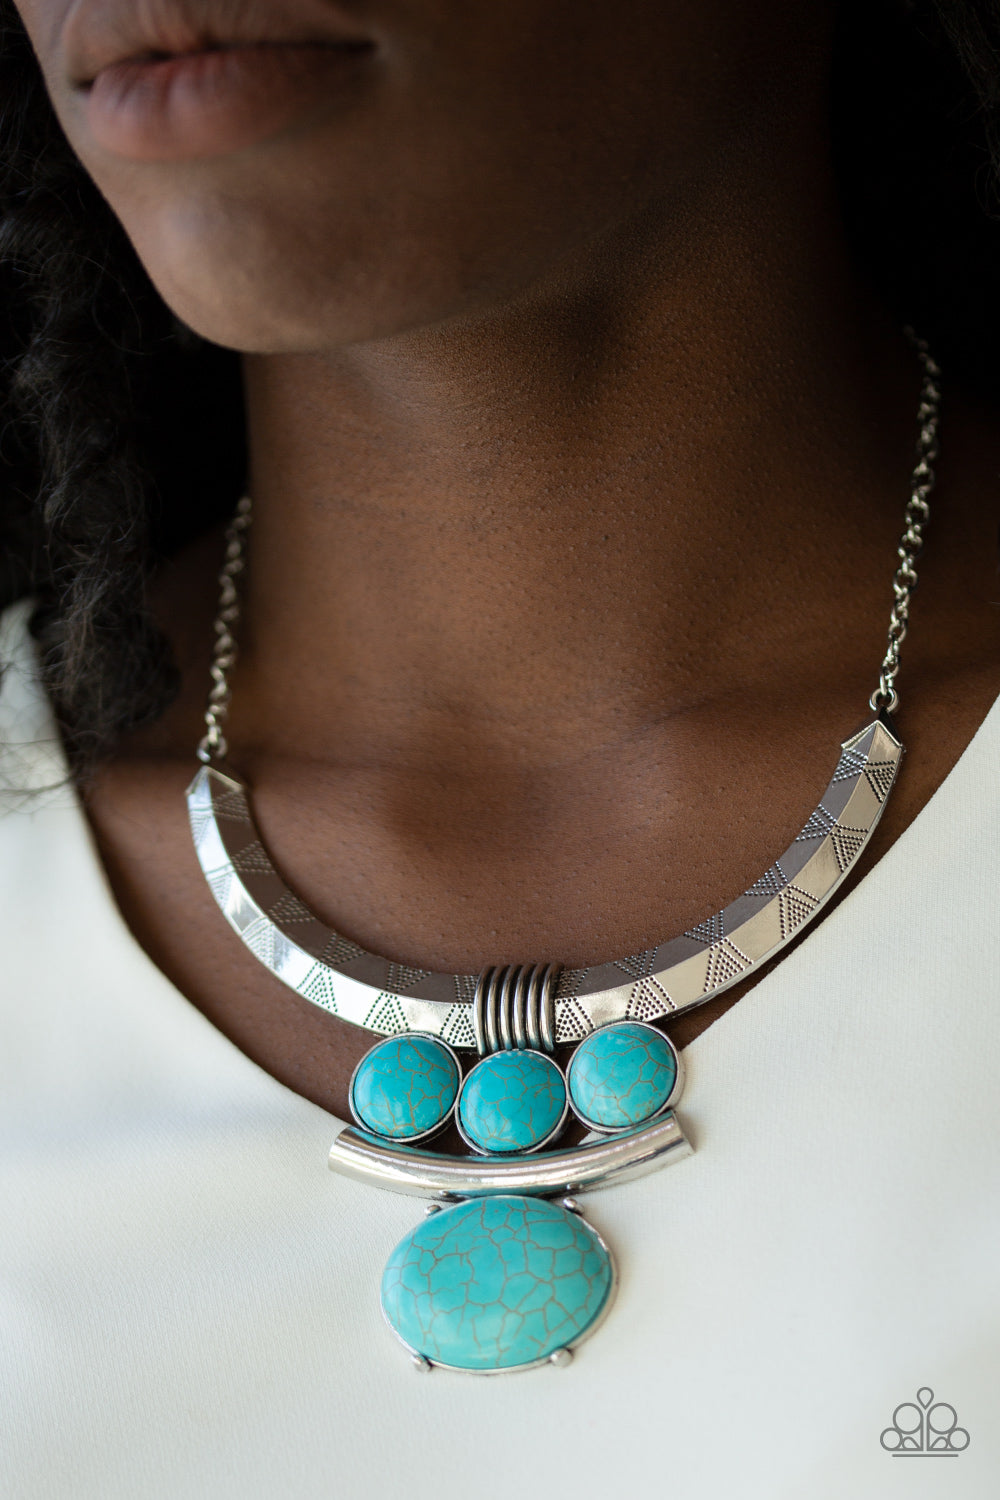 Paparazzi Jewelry & Accessories - Commander In CHIEFETTE - Blue Necklace. Bling By Titia Boutique